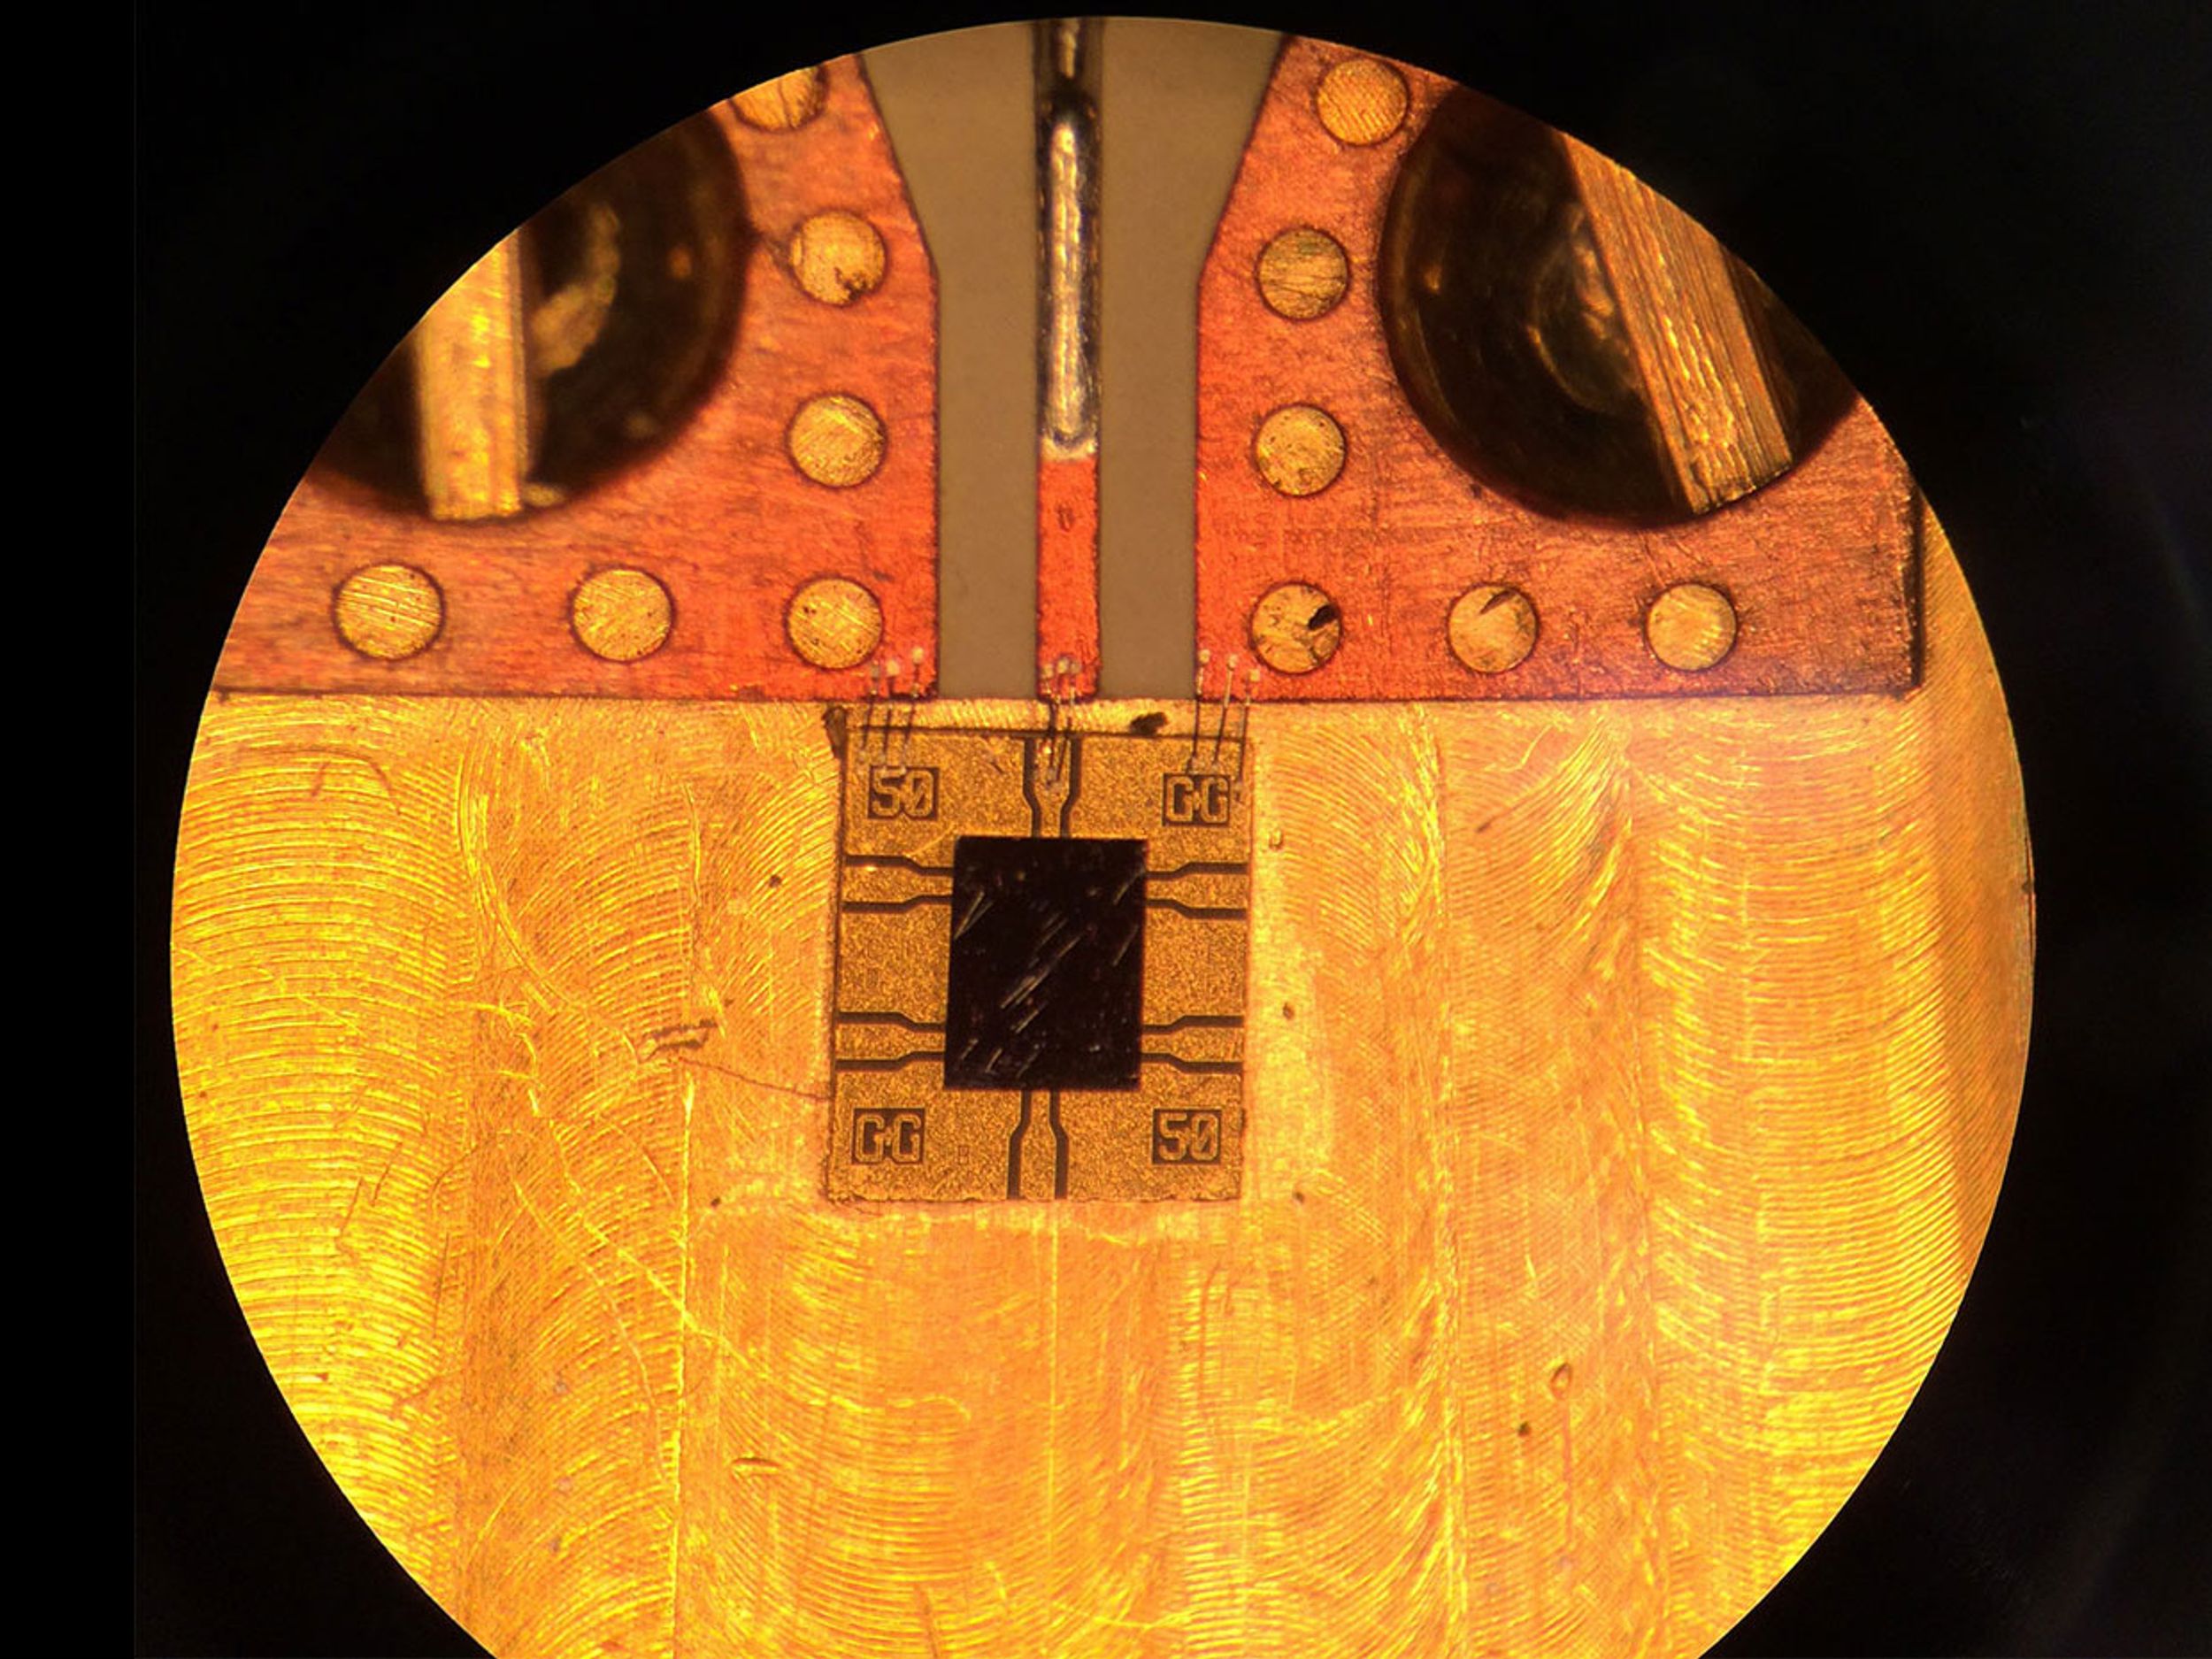 A high-speed, semiconductor photodiode (black rectangle) with a diode surrounded by a gold-coated border in which electrical leads are embedded. Wires connect the leads to the copper electrical circuit (top).